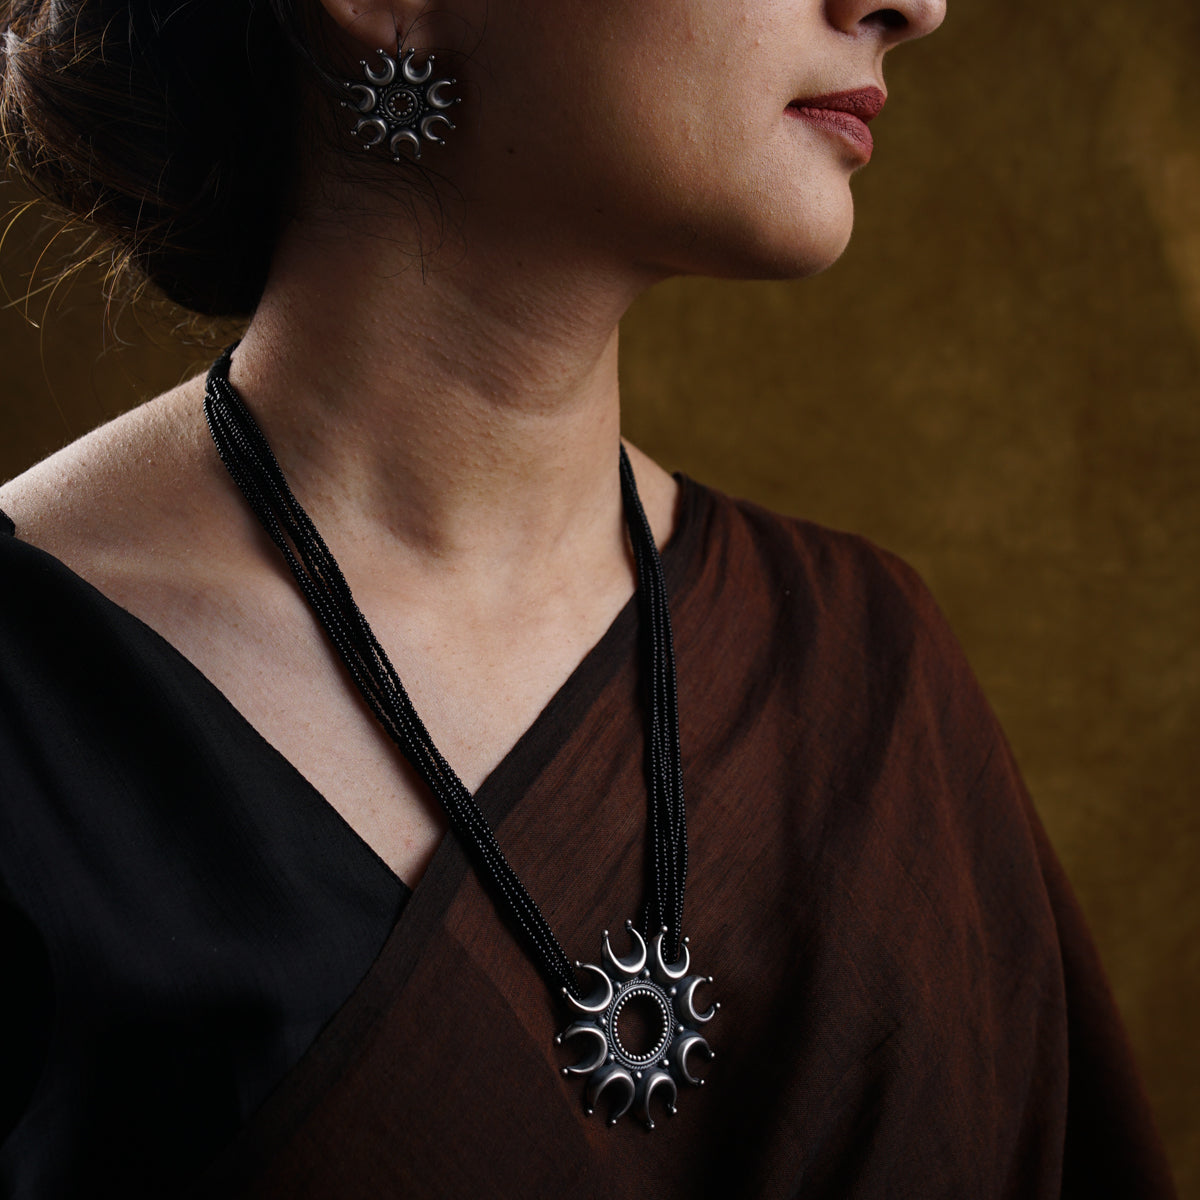 a woman wearing a necklace and earrings